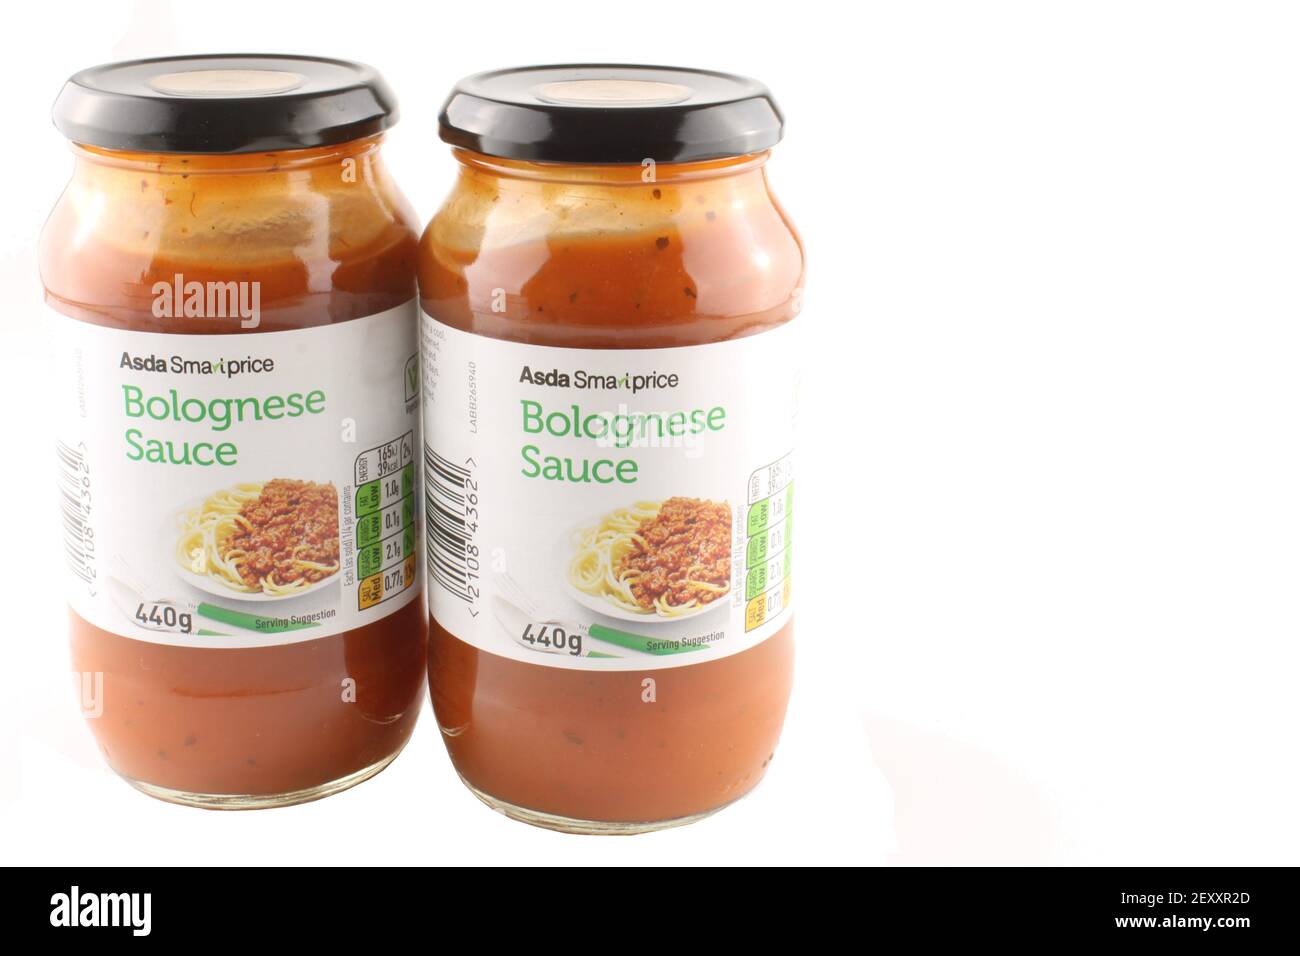 Two jars of bolognese sauce isolated on white with copy space on the right hand side. Stock Photo